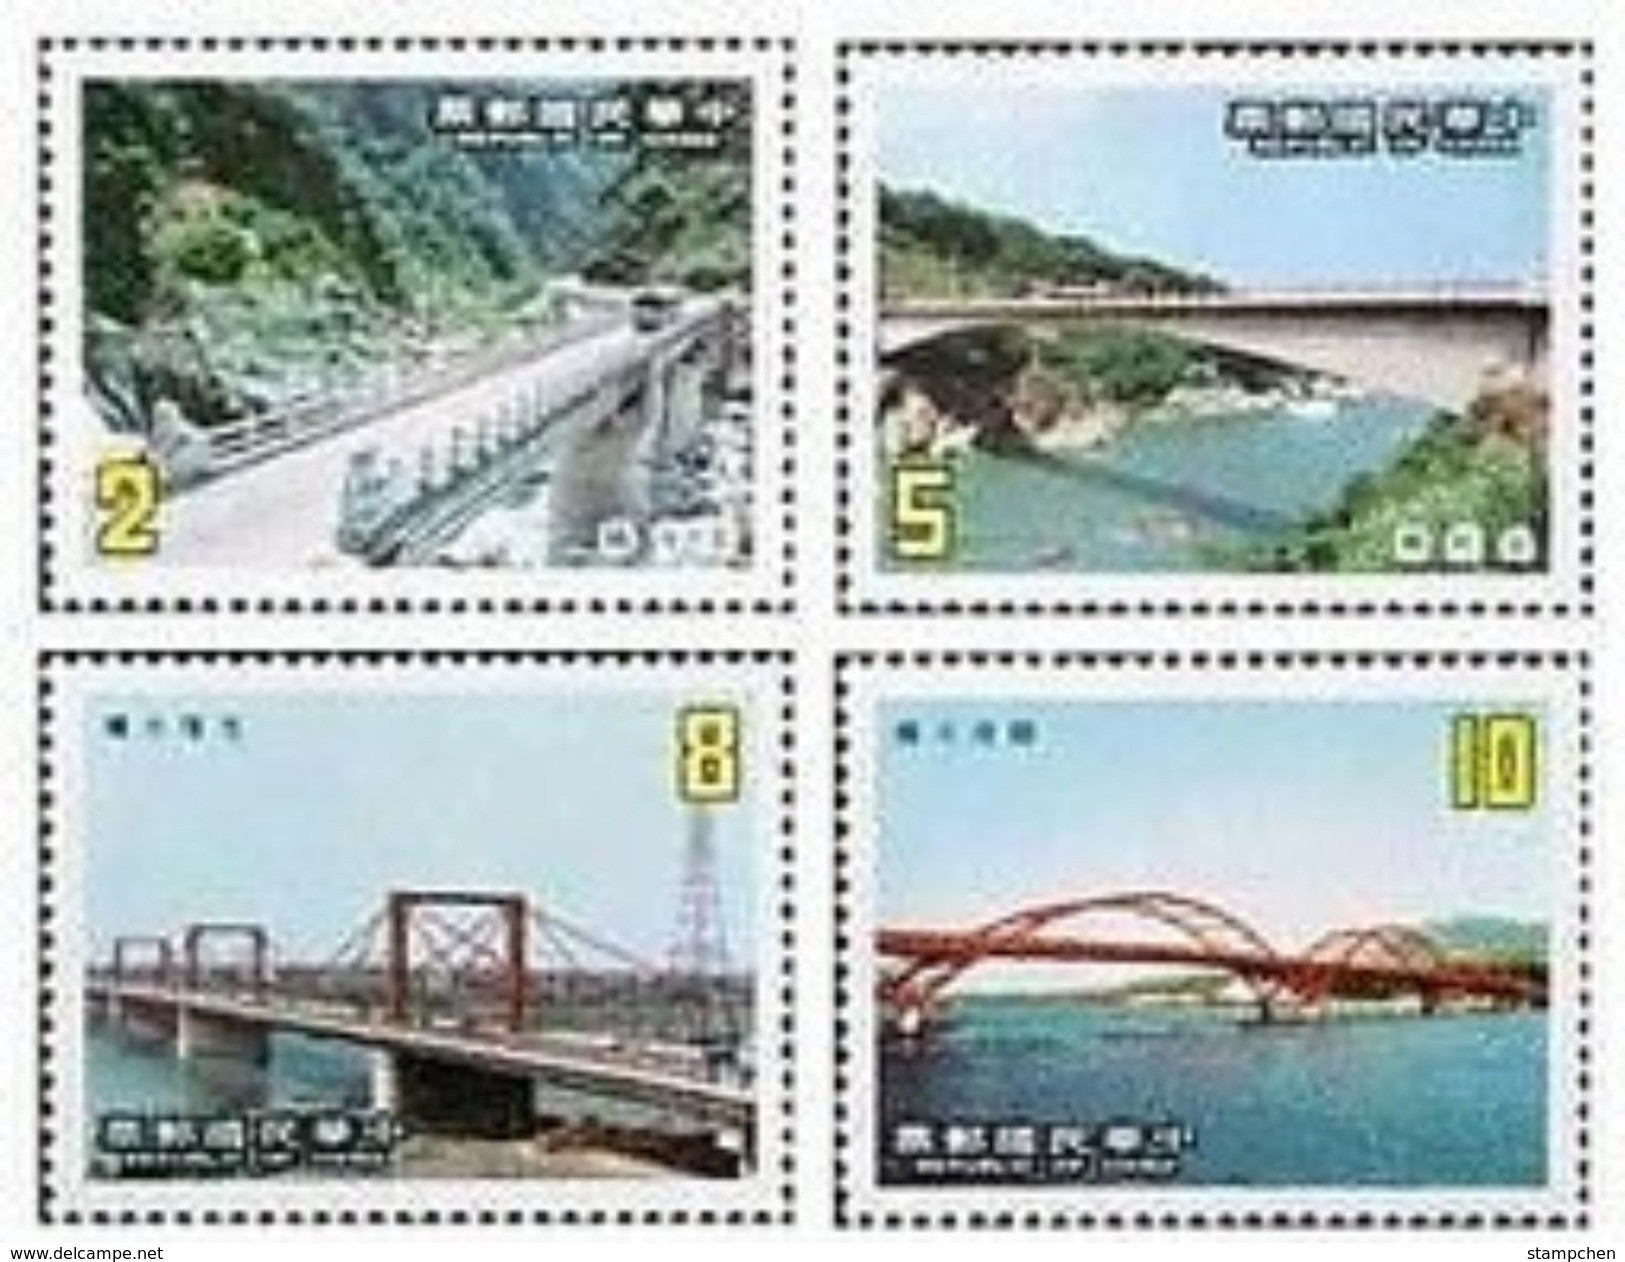 1986 Taiwan Bridge Stamps Boating Rafting Architecture River Scenery Bus - Bussen